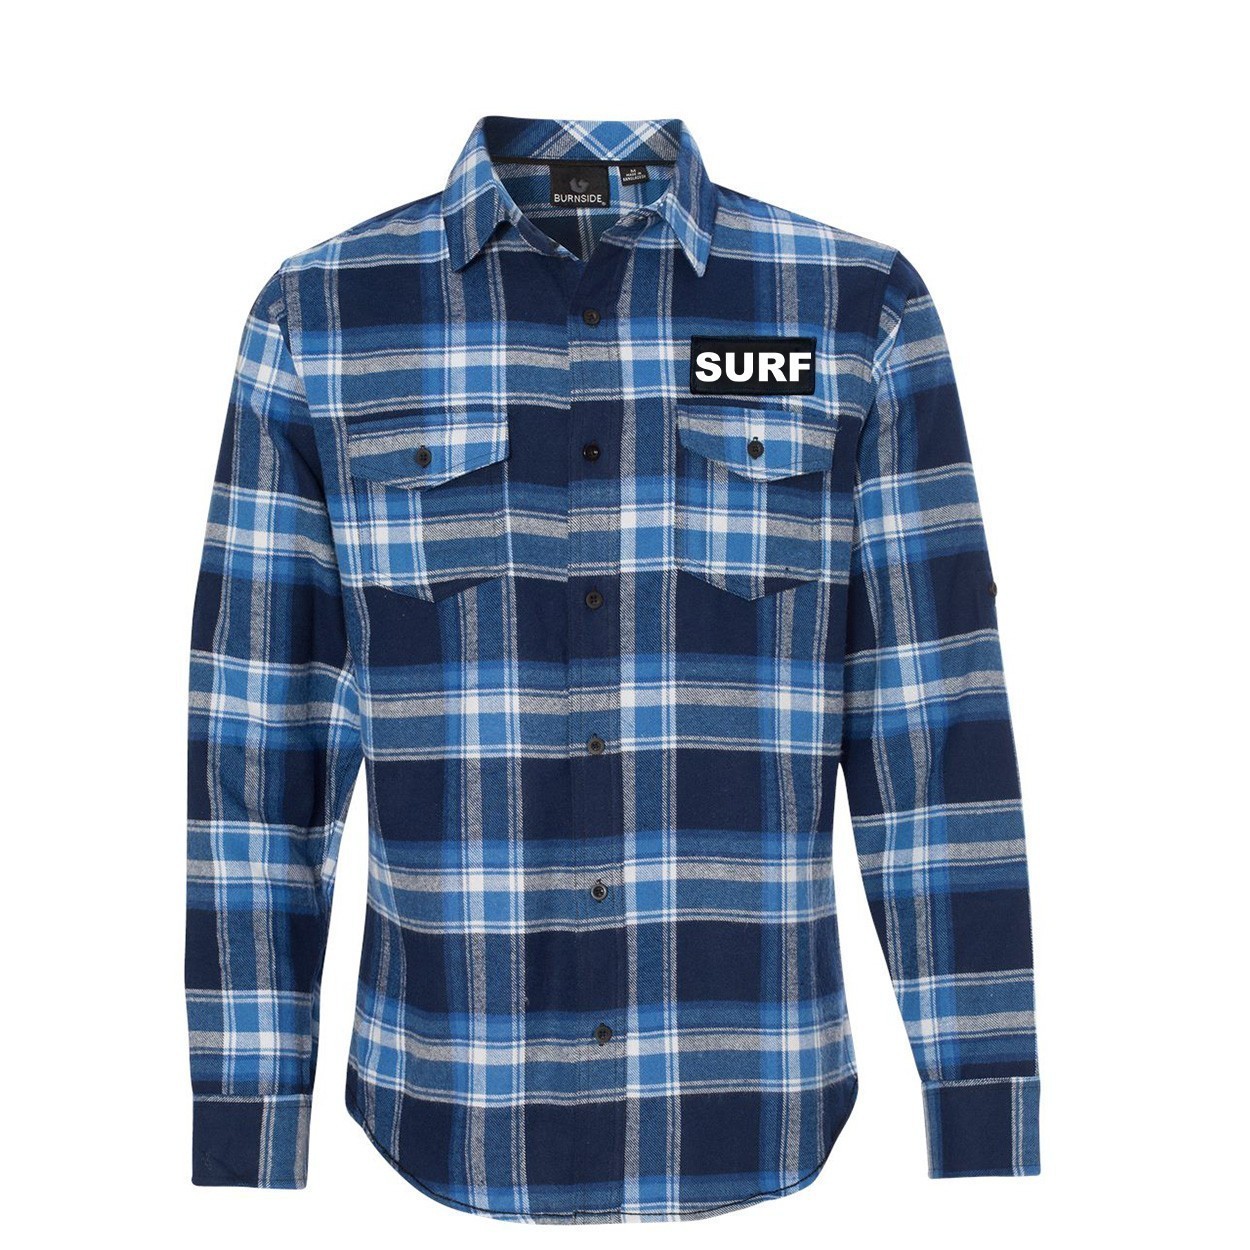 Surf Brand Logo Night Out Rectangle Woven Patch Flannel Shirt Long Sleeve Blue/White